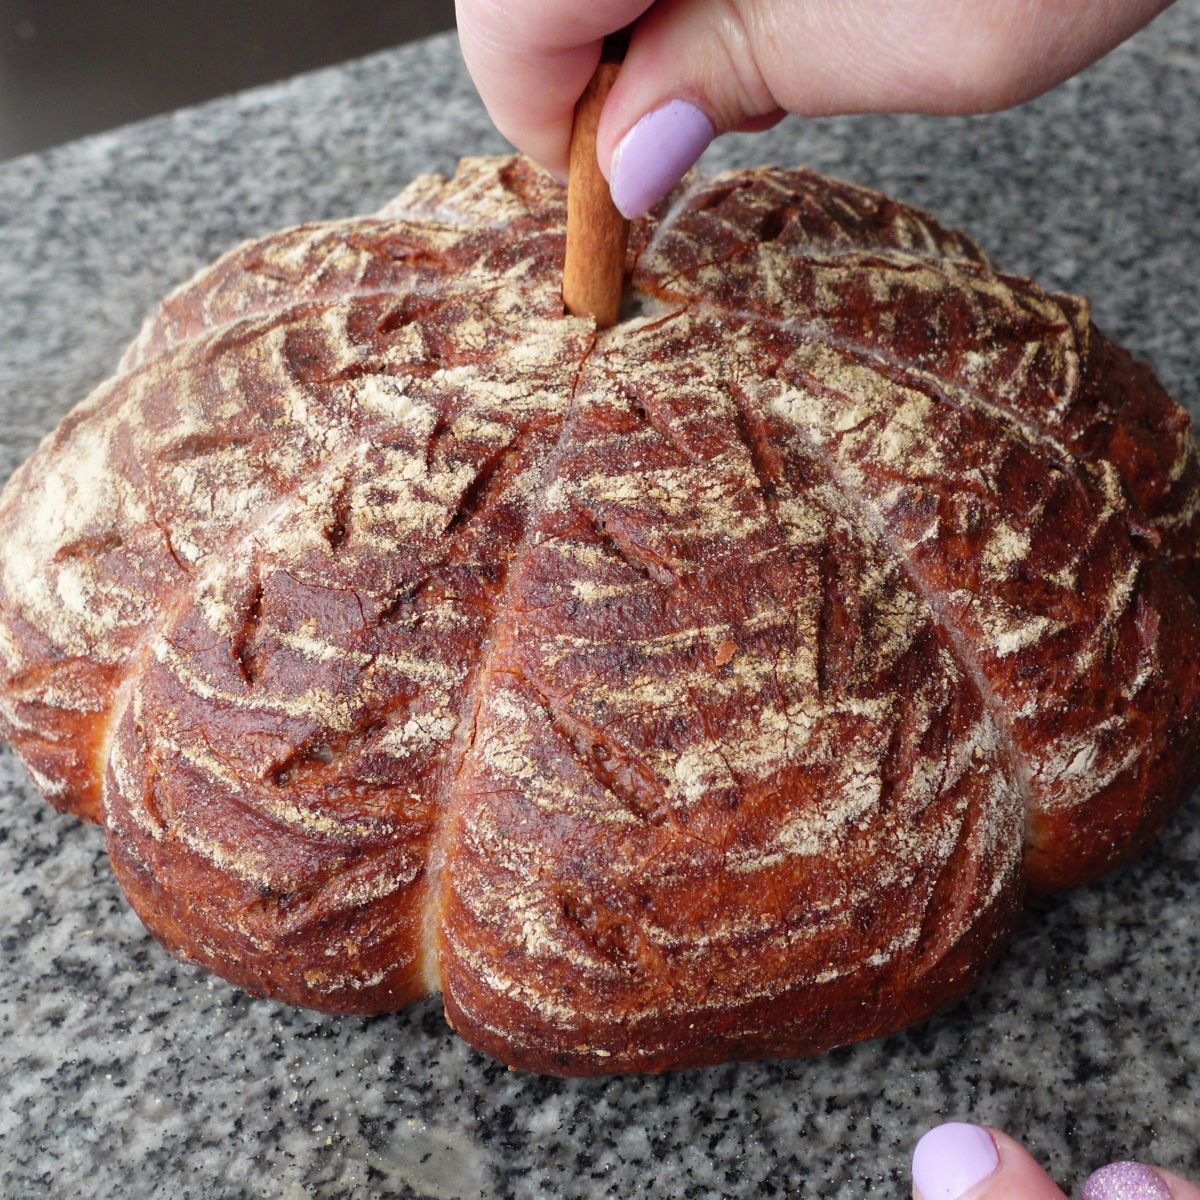 pushing cinnamon stick into the middle of baked and cooled pumpkin shaped bread.